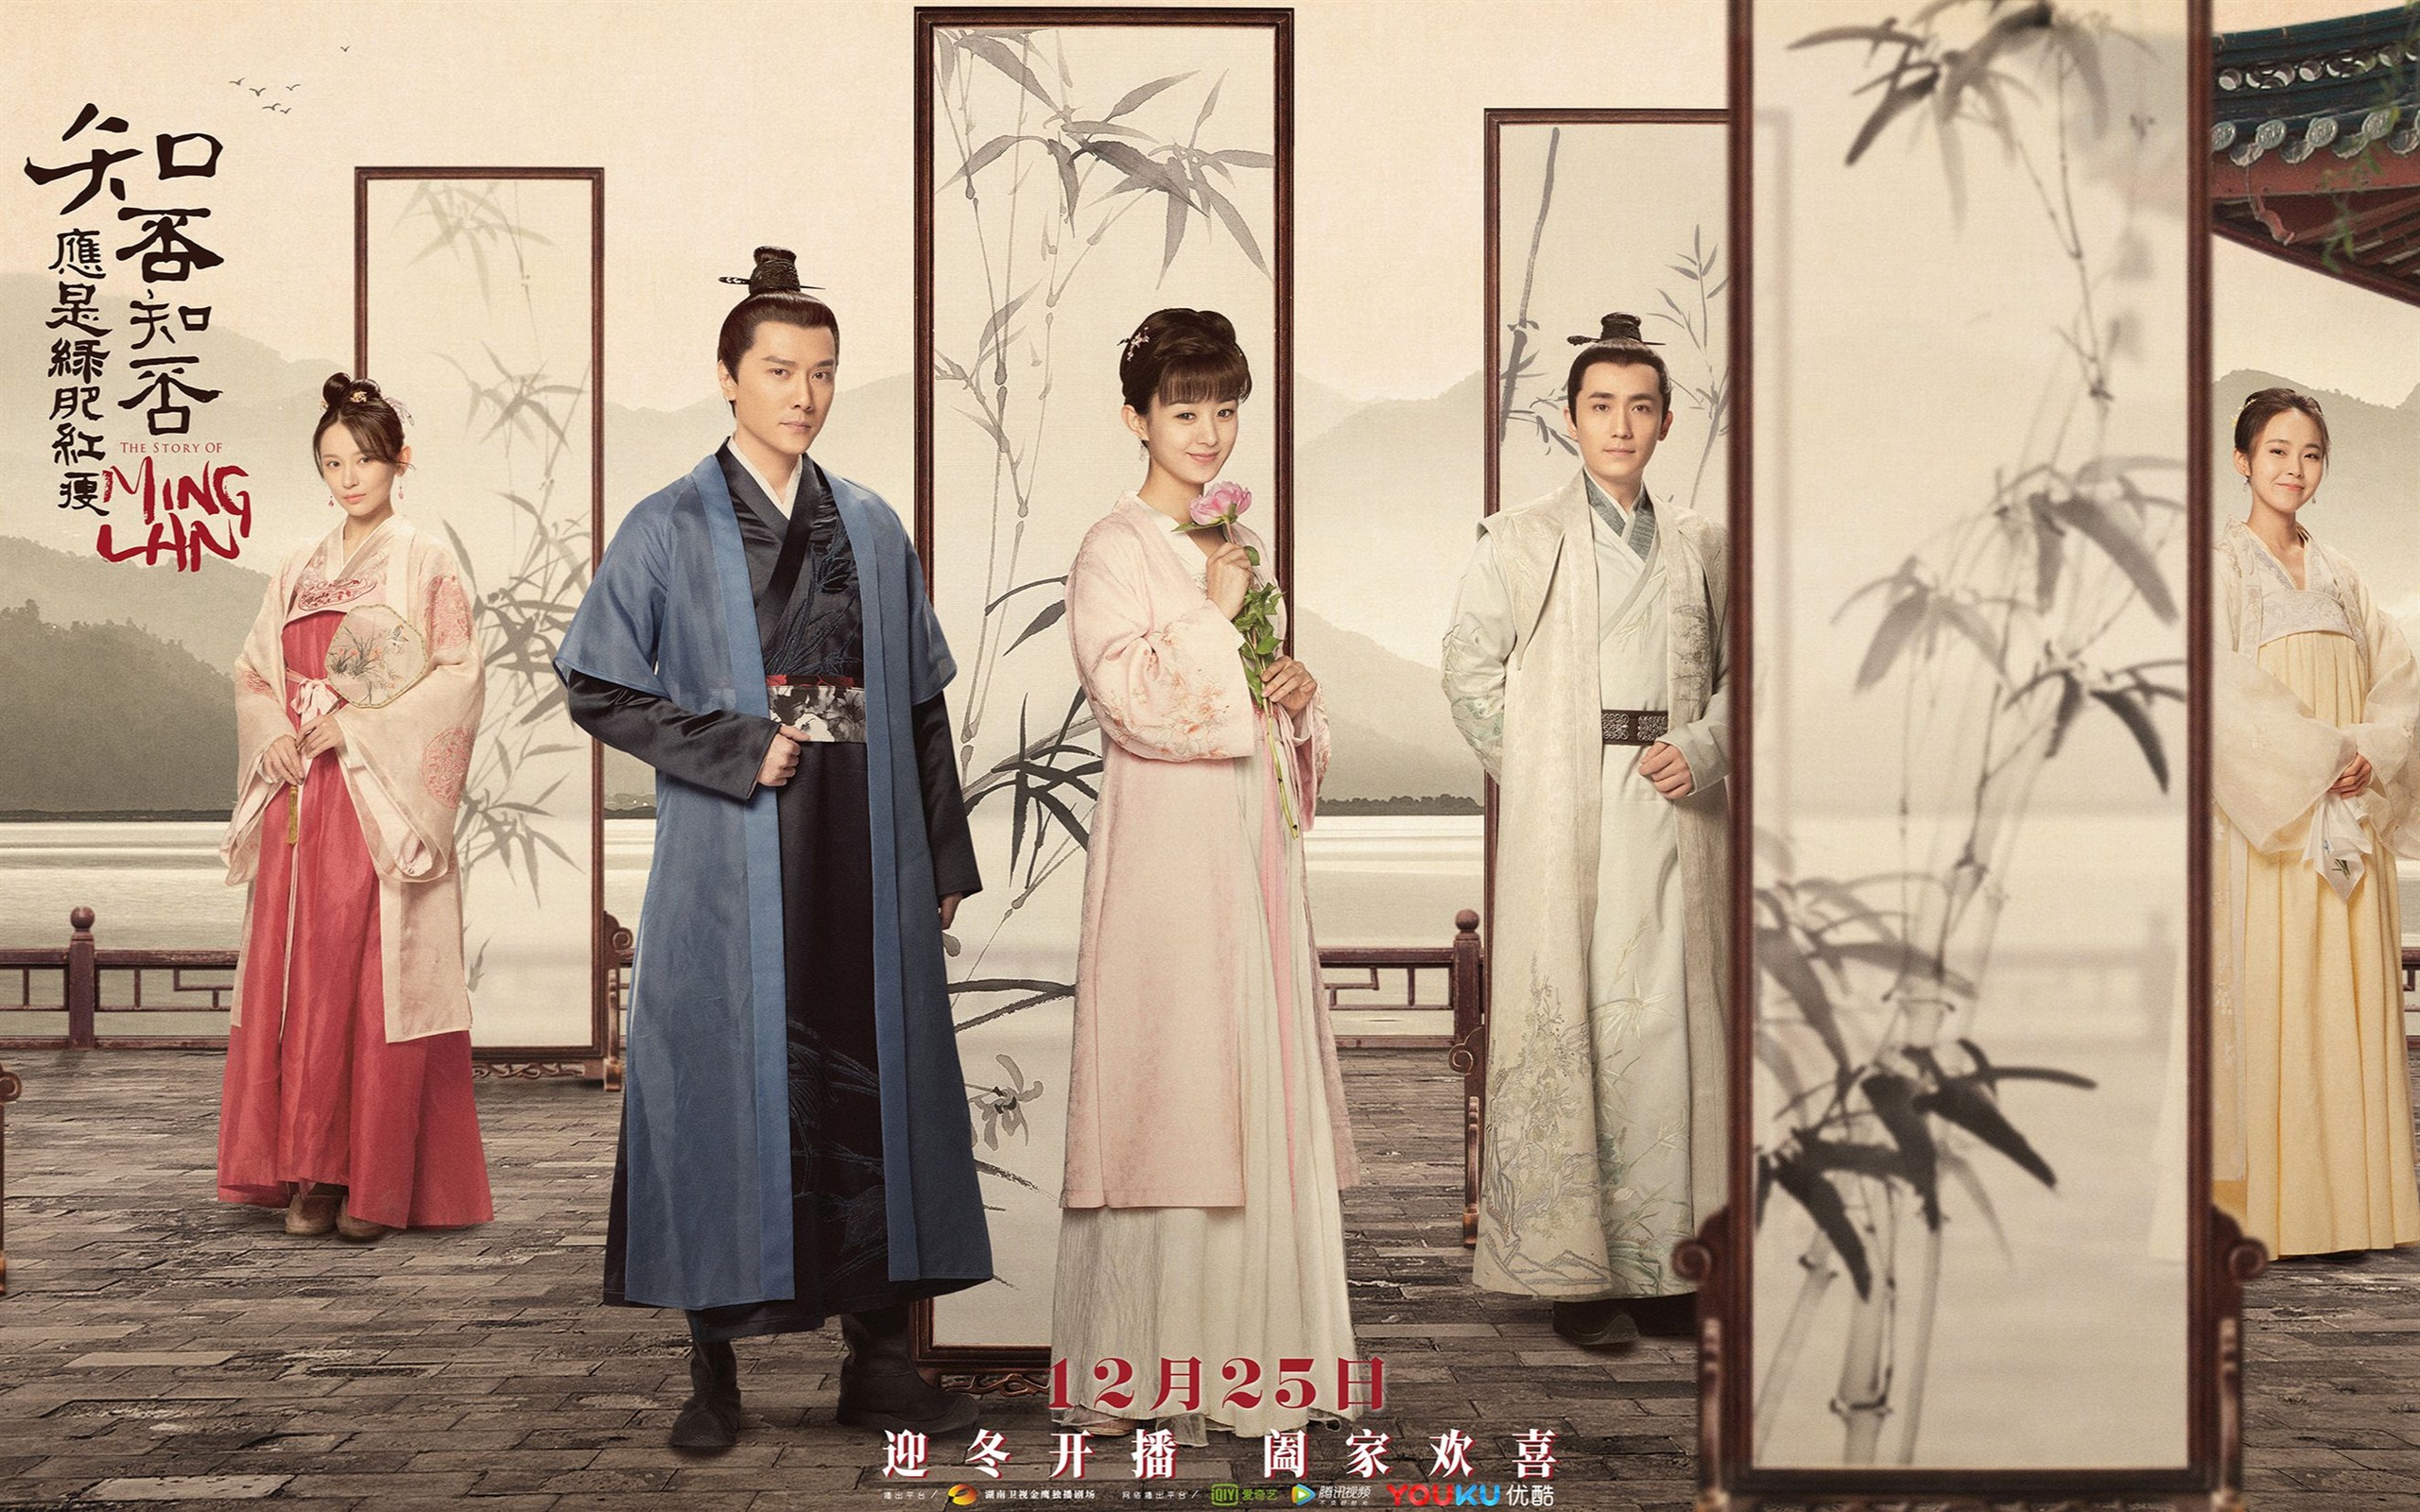 The Story Of MingLan, TV series HD wallpapers #35 - 2560x1600